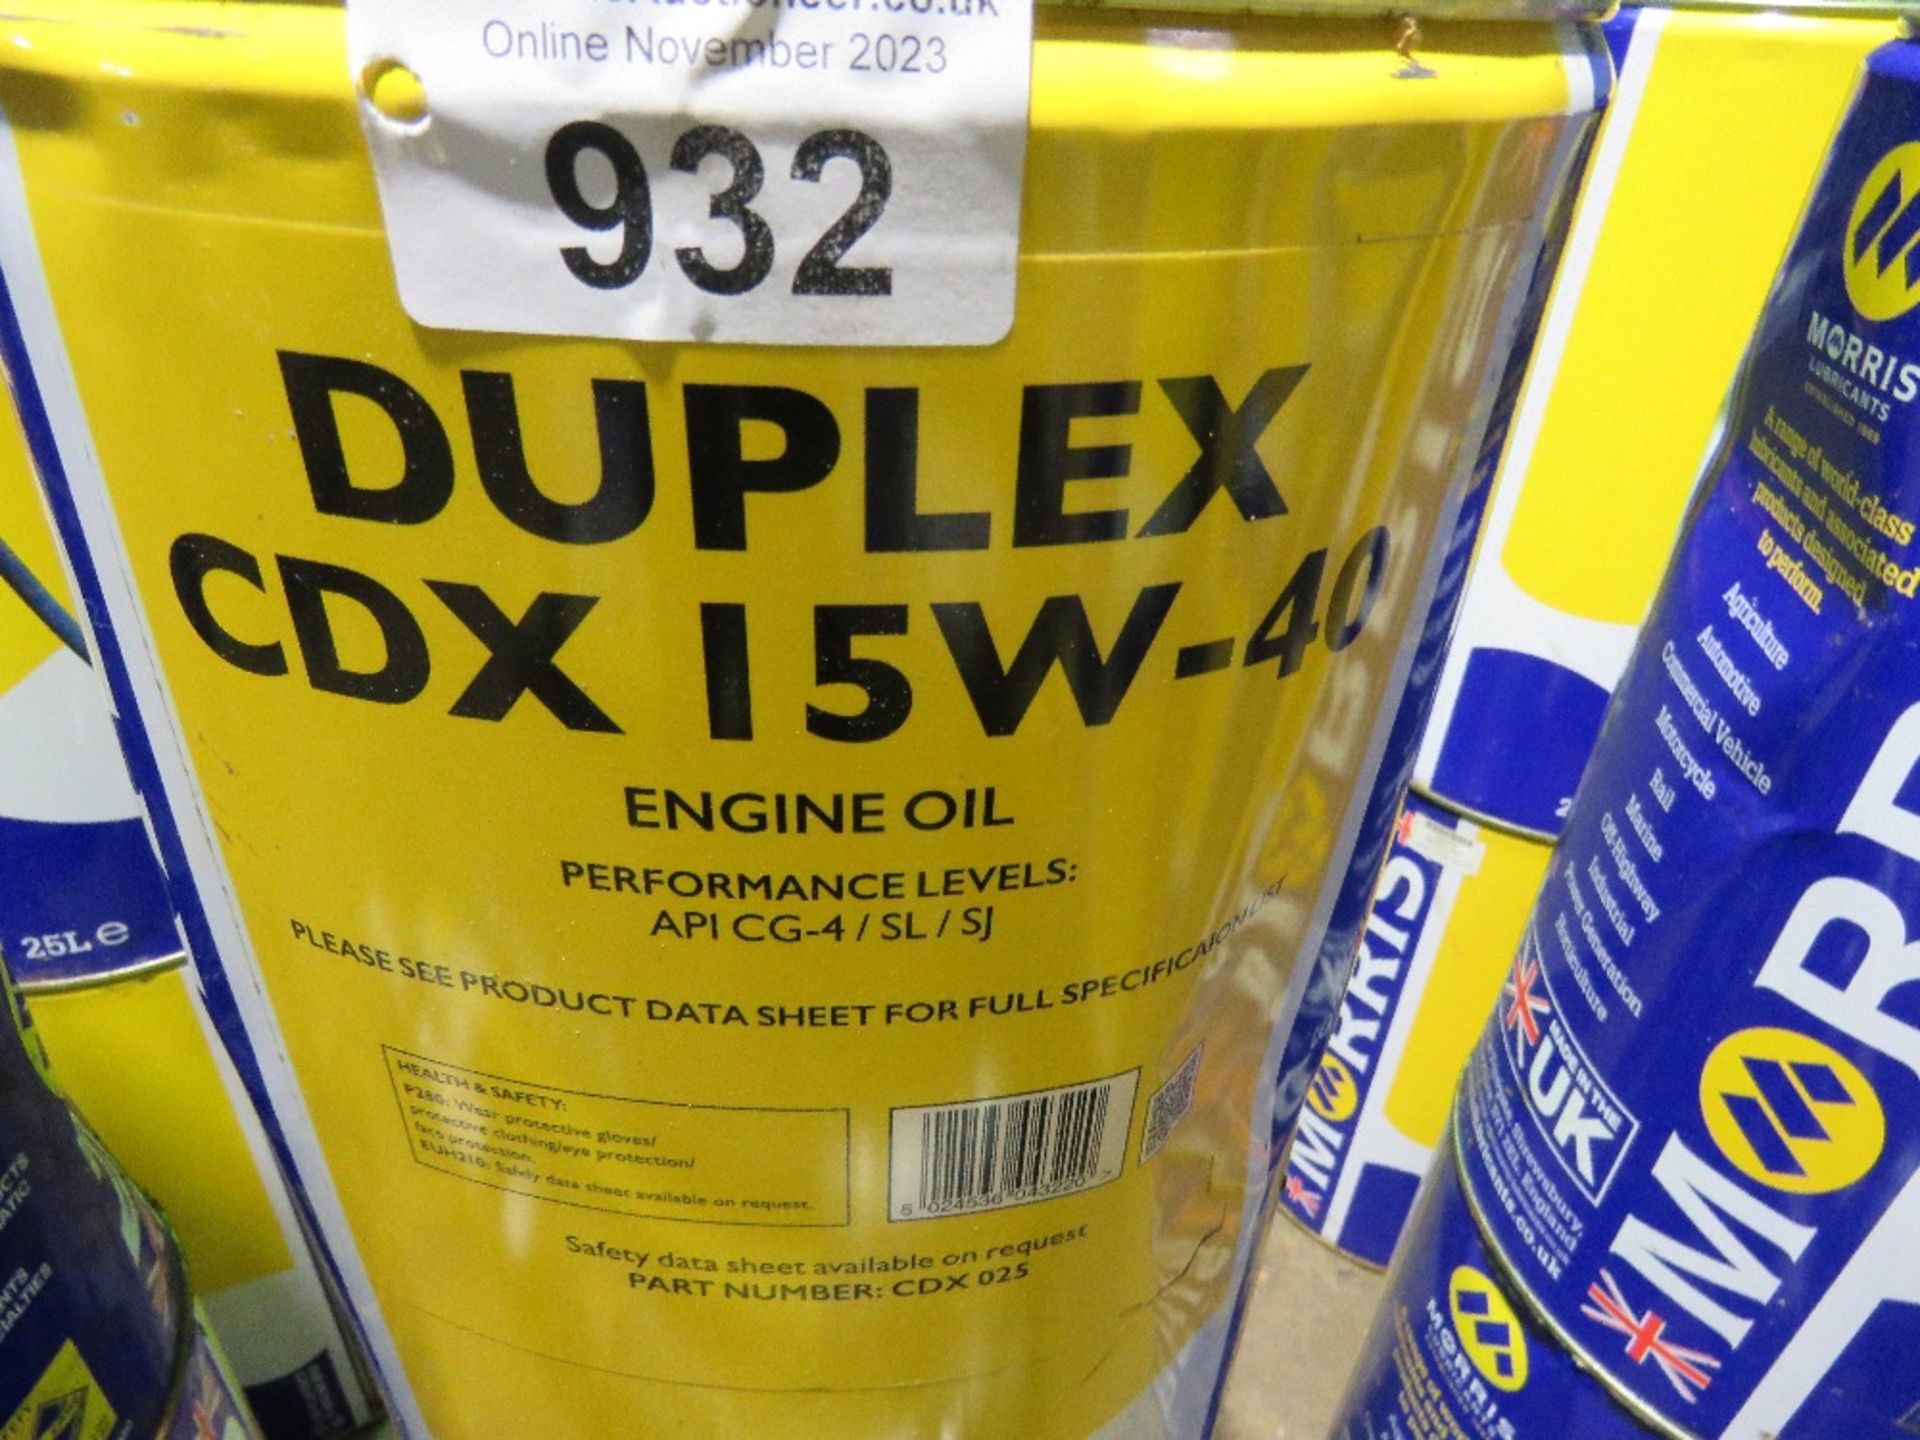 2NO 25LITRE DRUMS OF MORRIS OILS: DUPLEX 15W40 ENGINE OIL. SOURCED FROM COMPANY LIQUIDATION. - Image 2 of 2